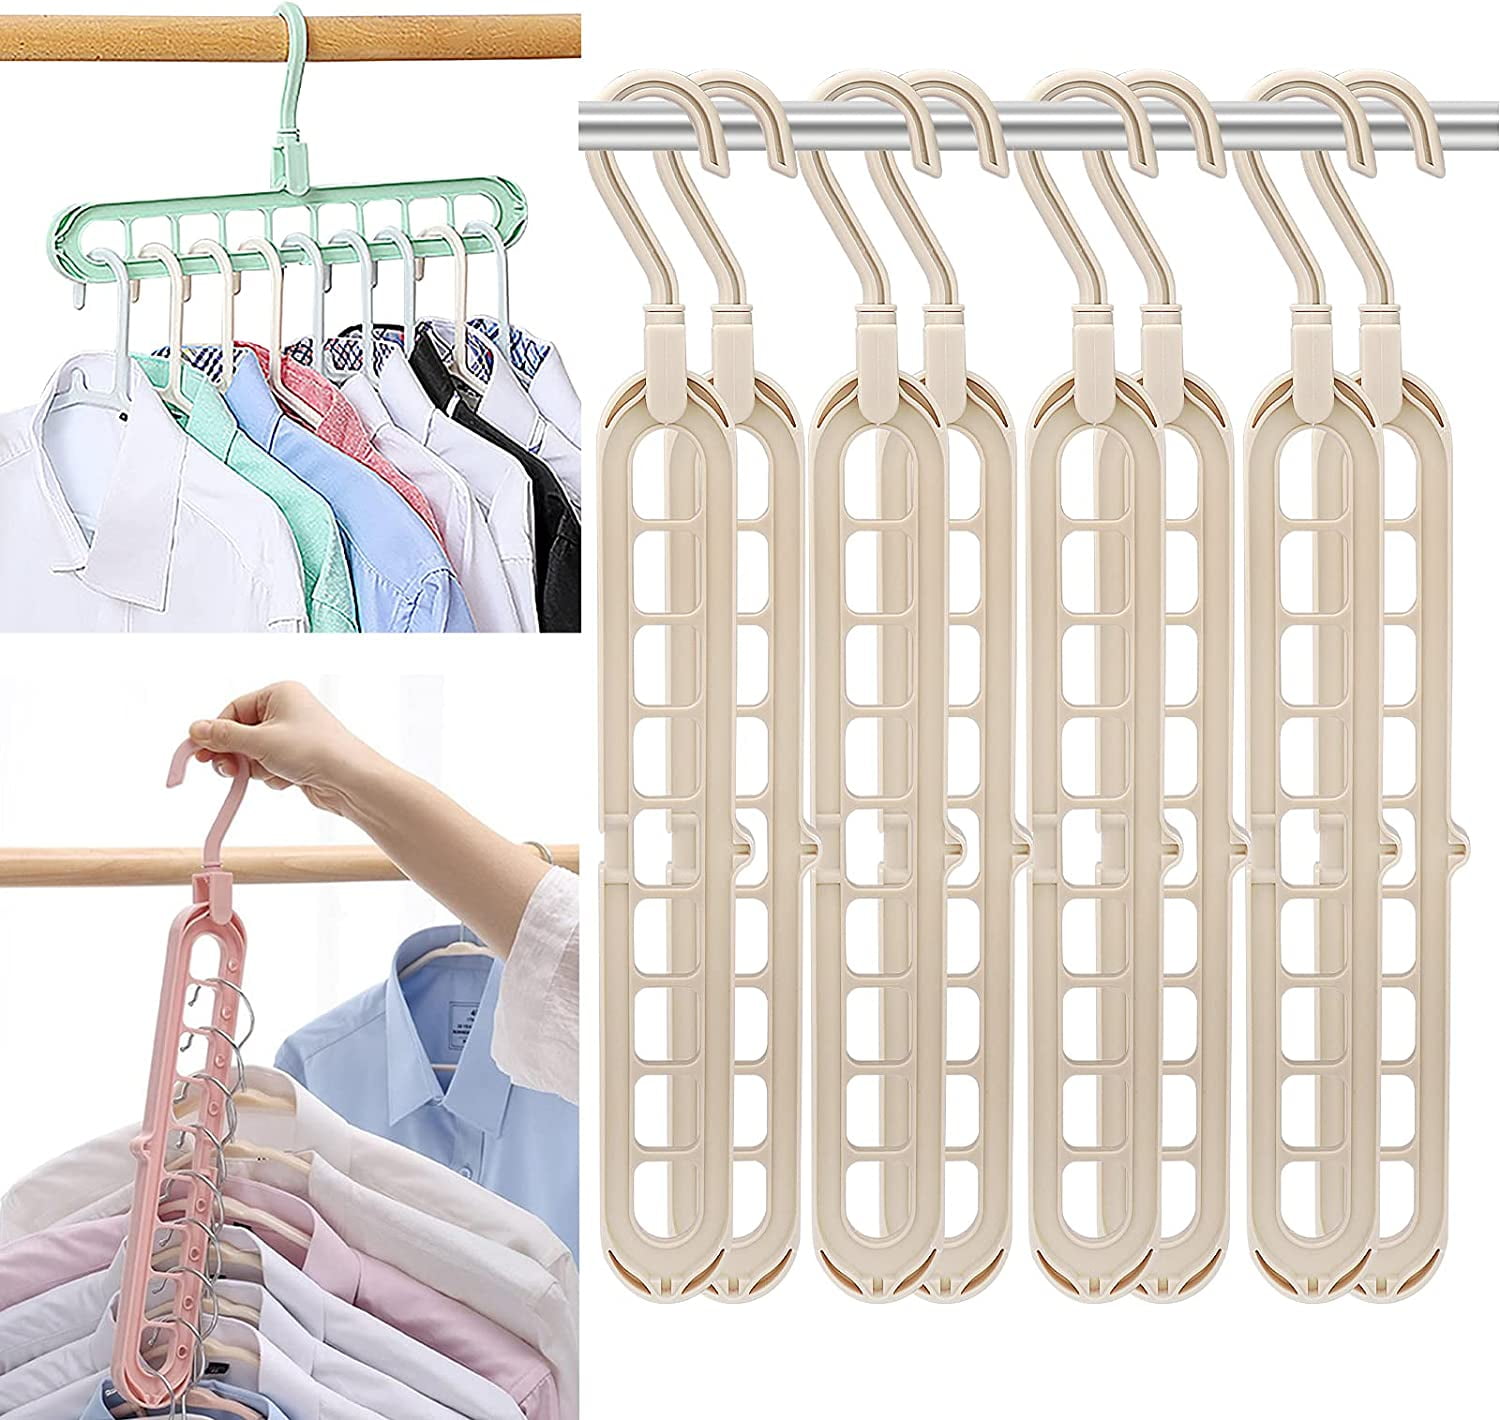  FIFATA Space Saving Cascading Clothes Hangers, 4 Pack,  Polypropylene, Heavy Duty, White, Pink, Light Gray, Green : Home & Kitchen